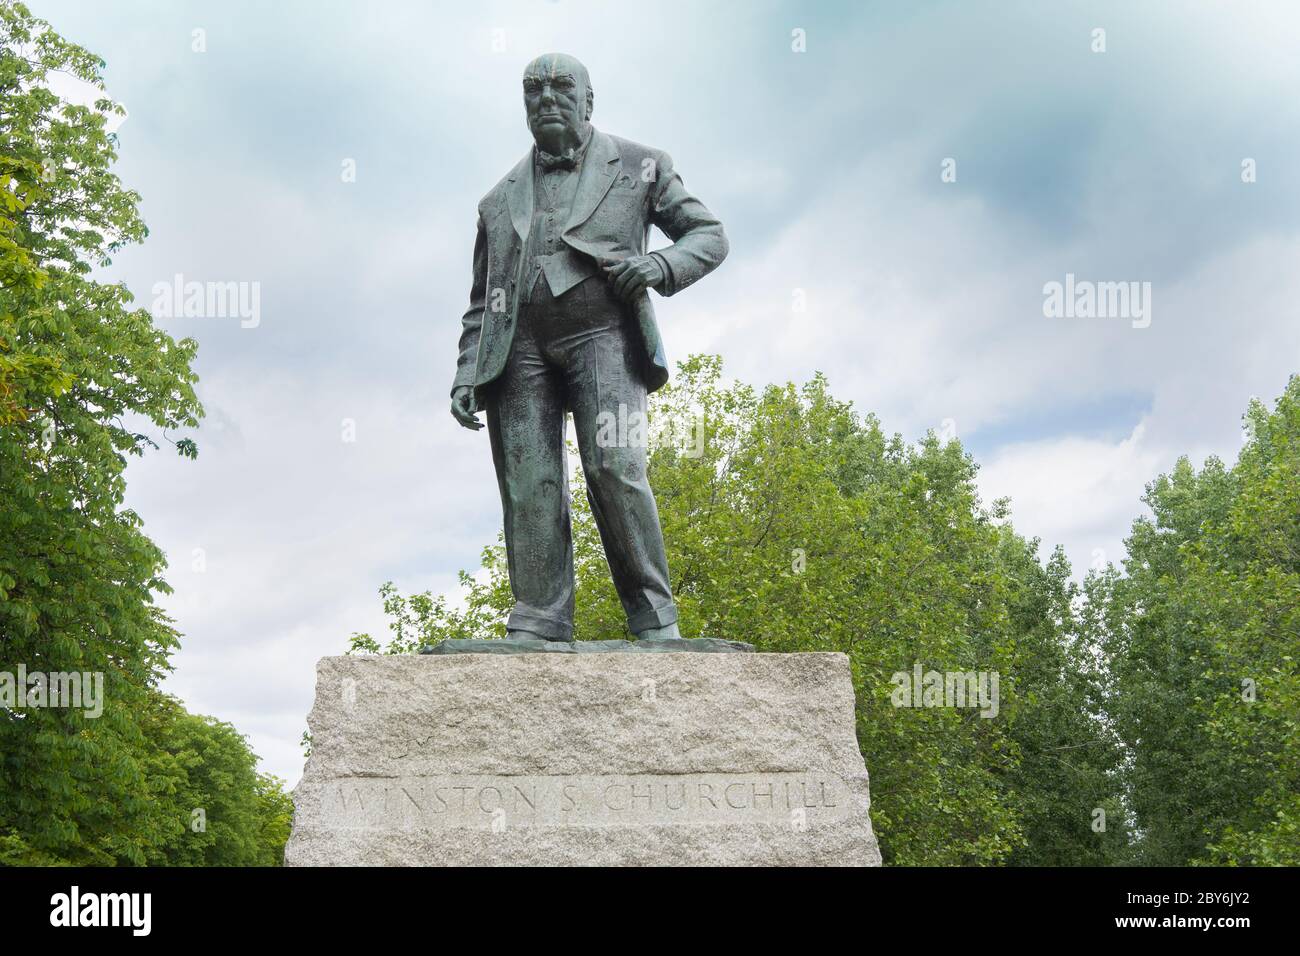 Winston Churchill Bronze Statue on plinth in Woodford Green, photo looking up from plinth. Essex, England Stock Photo